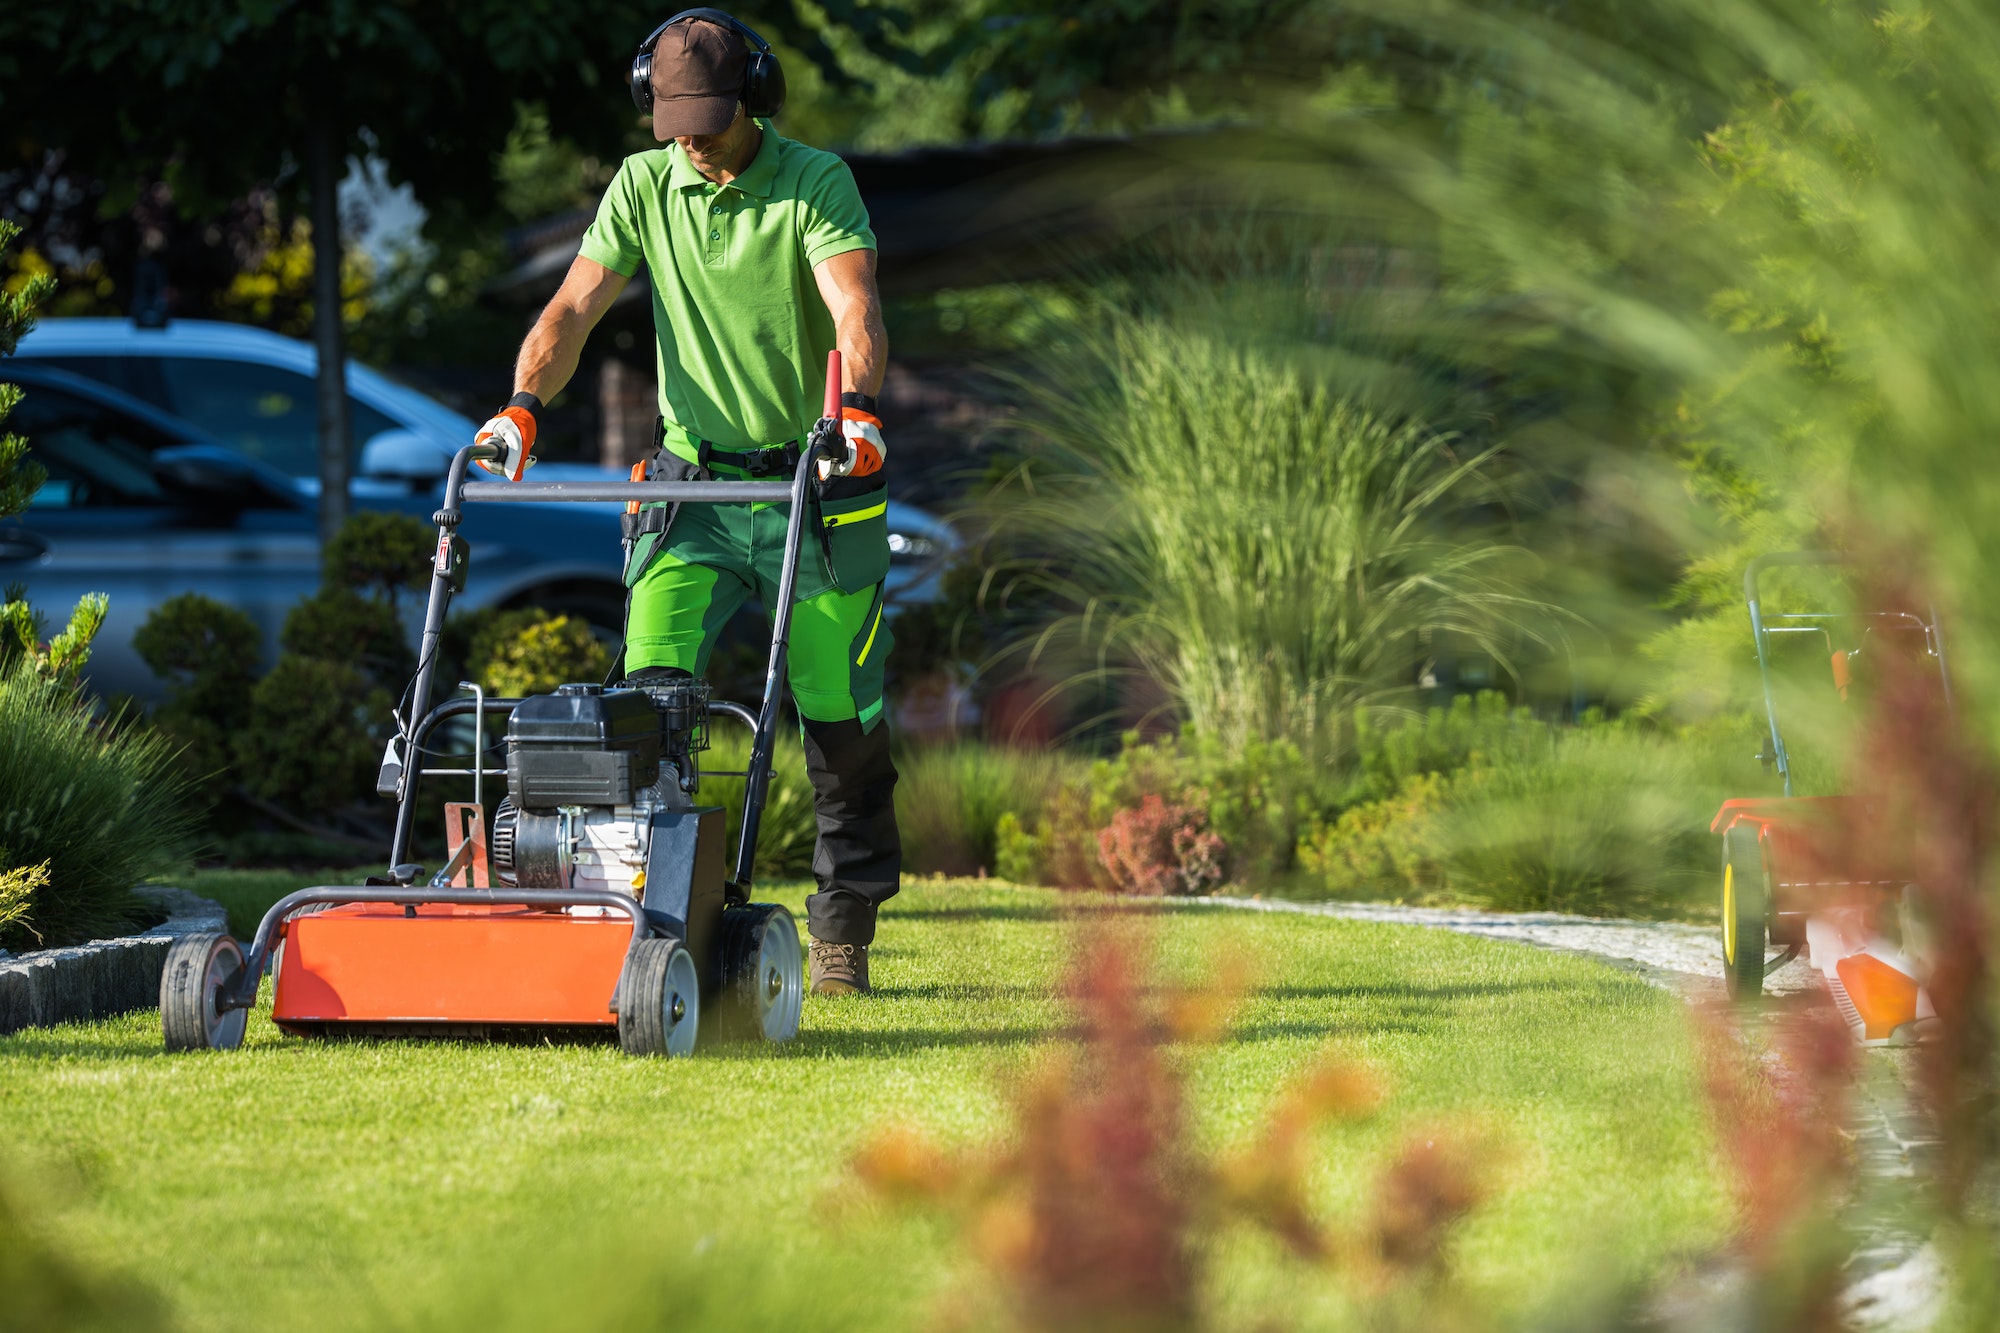 Landscaper with Scarifier Machine Taking Care of a Lawn.